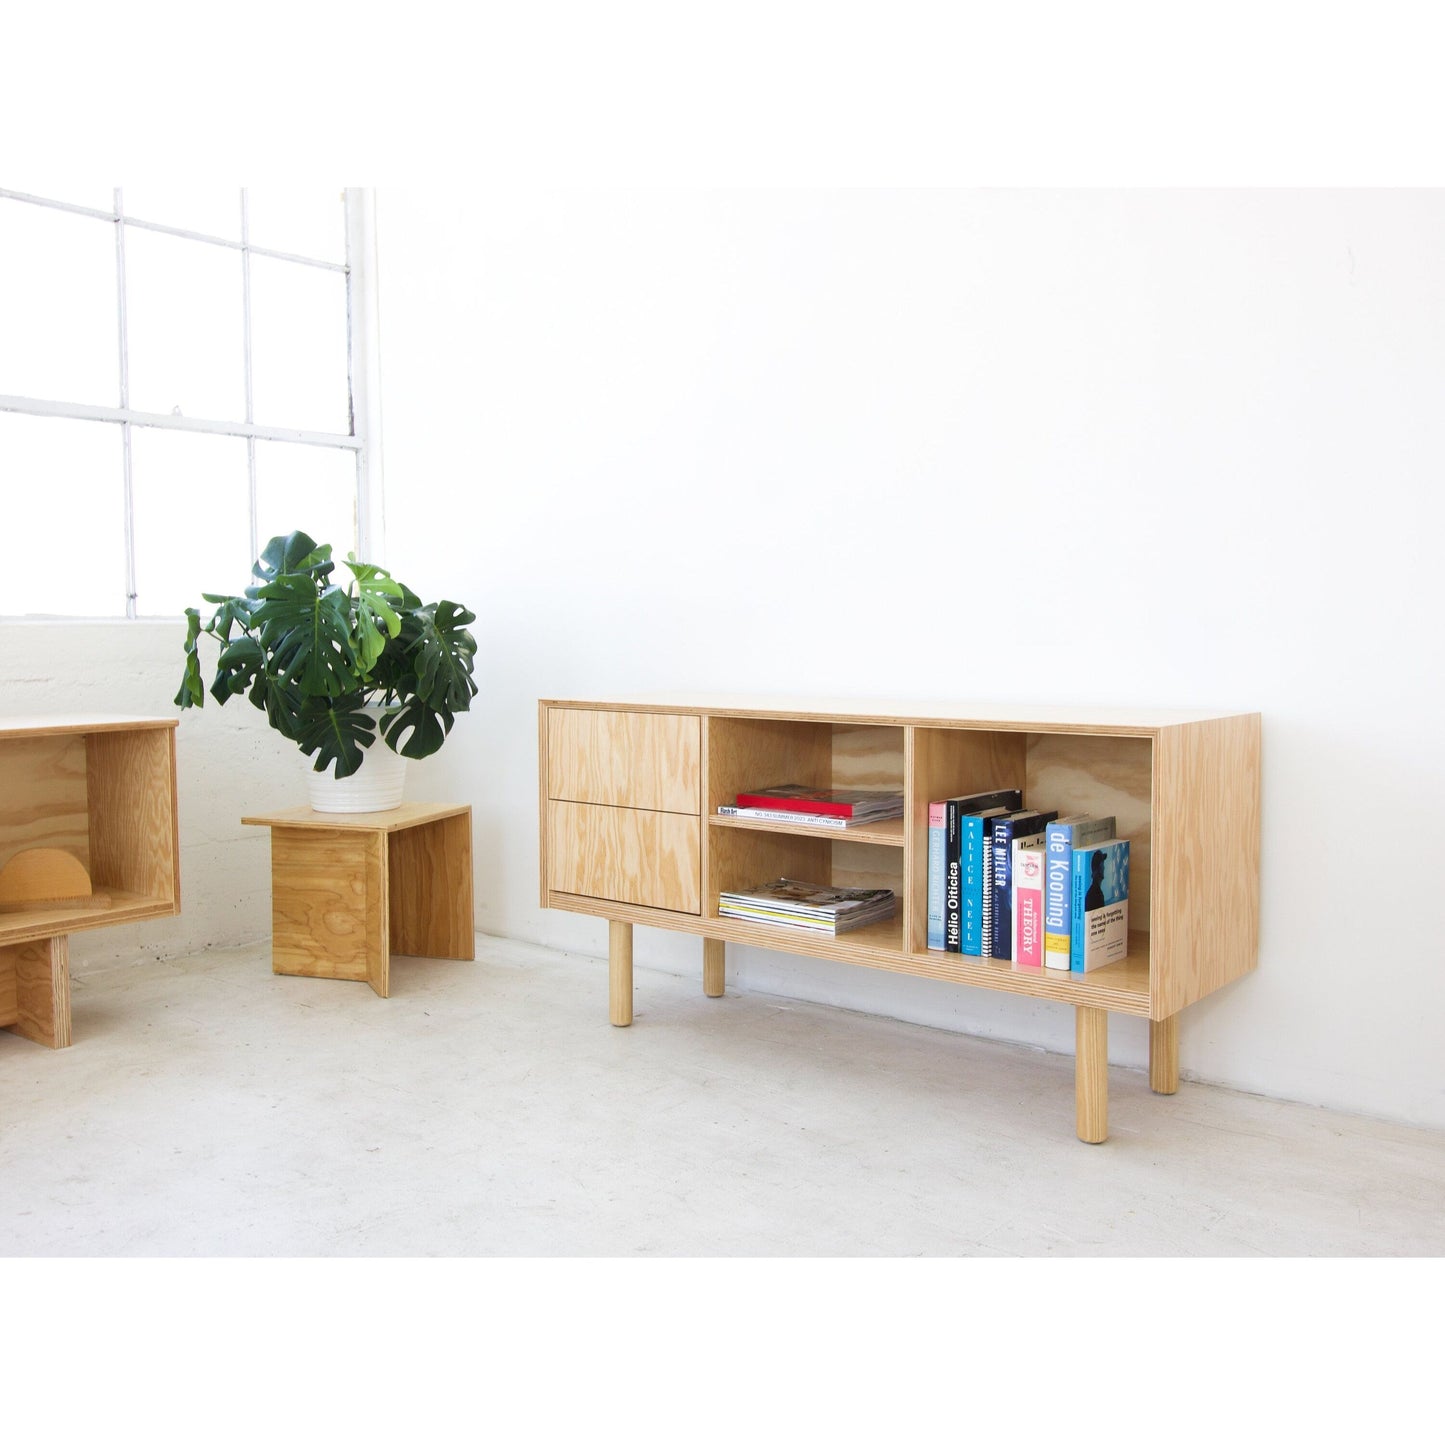 Vinyl Record Storage Cabinet | Credenza with drawers | Minimalist Sideboard | Doug Fir sideboard with drawers | Made in LA